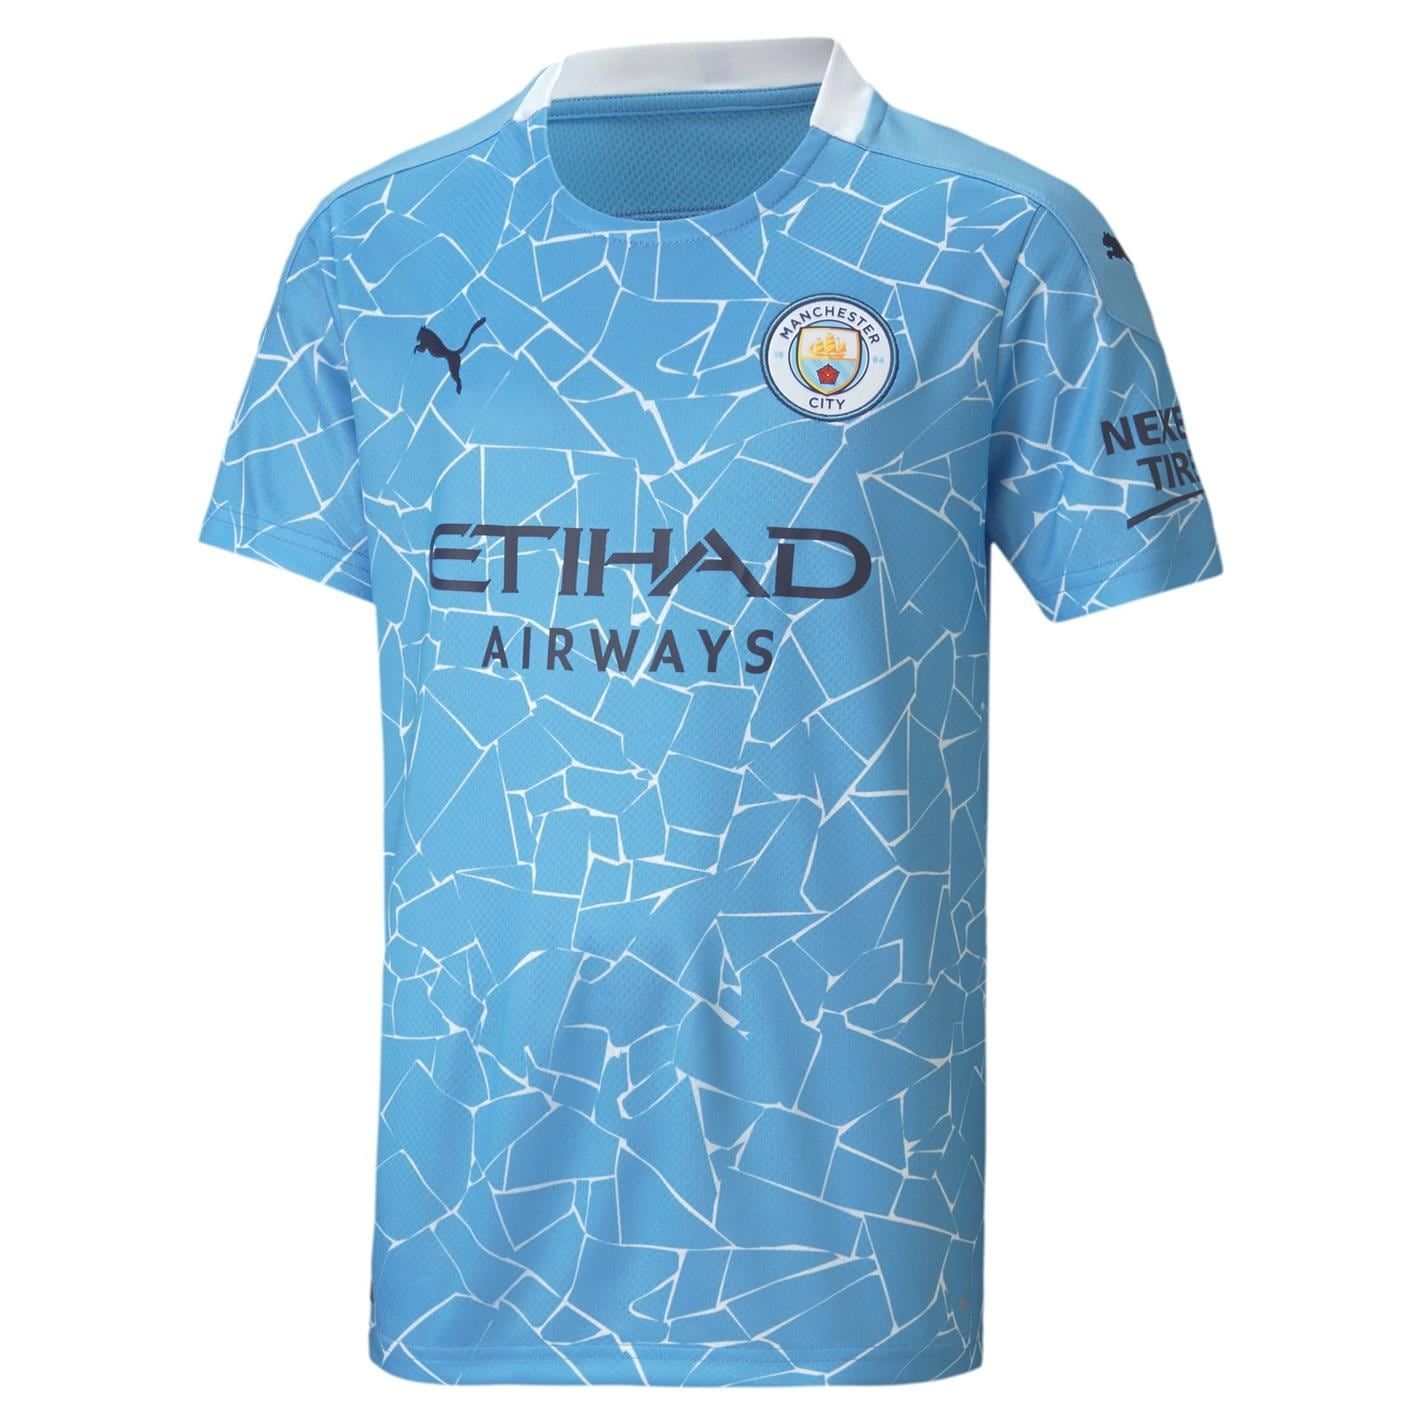 Puma Manchester City Home Shirt 2020 2021 Junior - Cheer on The Cityzens to further success with this Junior Manchester City Home Shirt which has been developed with dryCELL technology to deliver moisture wicking comfort form the first and final whistle. The jersey features an all-over graphic print which pays homage to the iconic mosaics which are located throughout the city, while the Puma branding and team crest completes the look perfect for any young City fan.